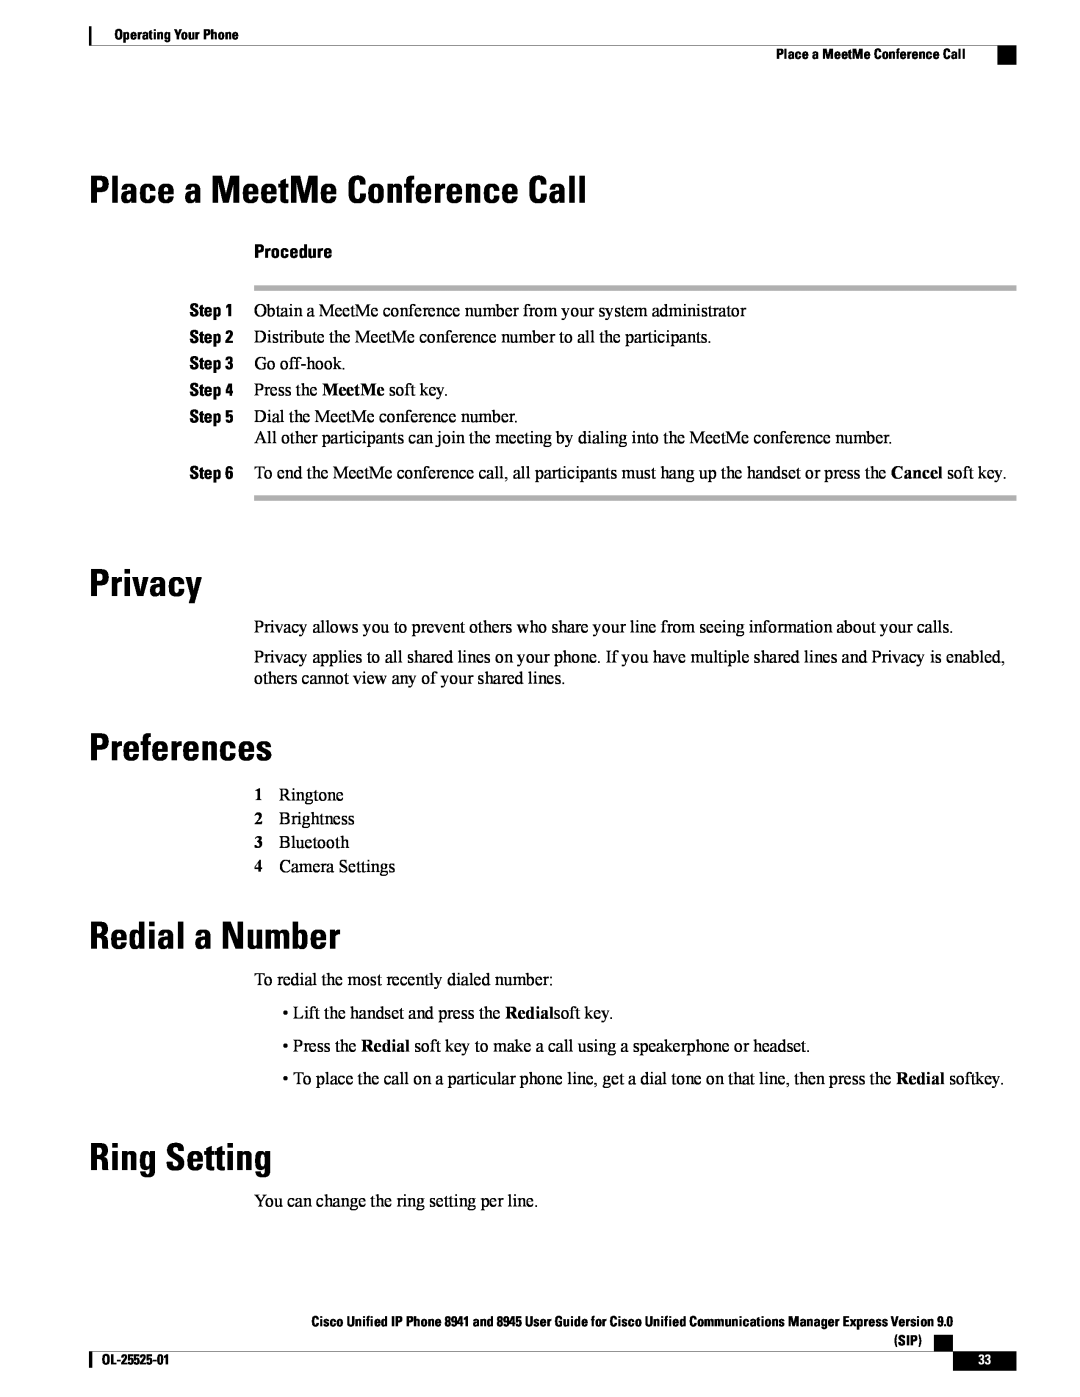 Cisco Systems 8945, 8941 Place a MeetMe Conference Call, Privacy, Preferences, Redial a Number, Ring Setting, Procedure 